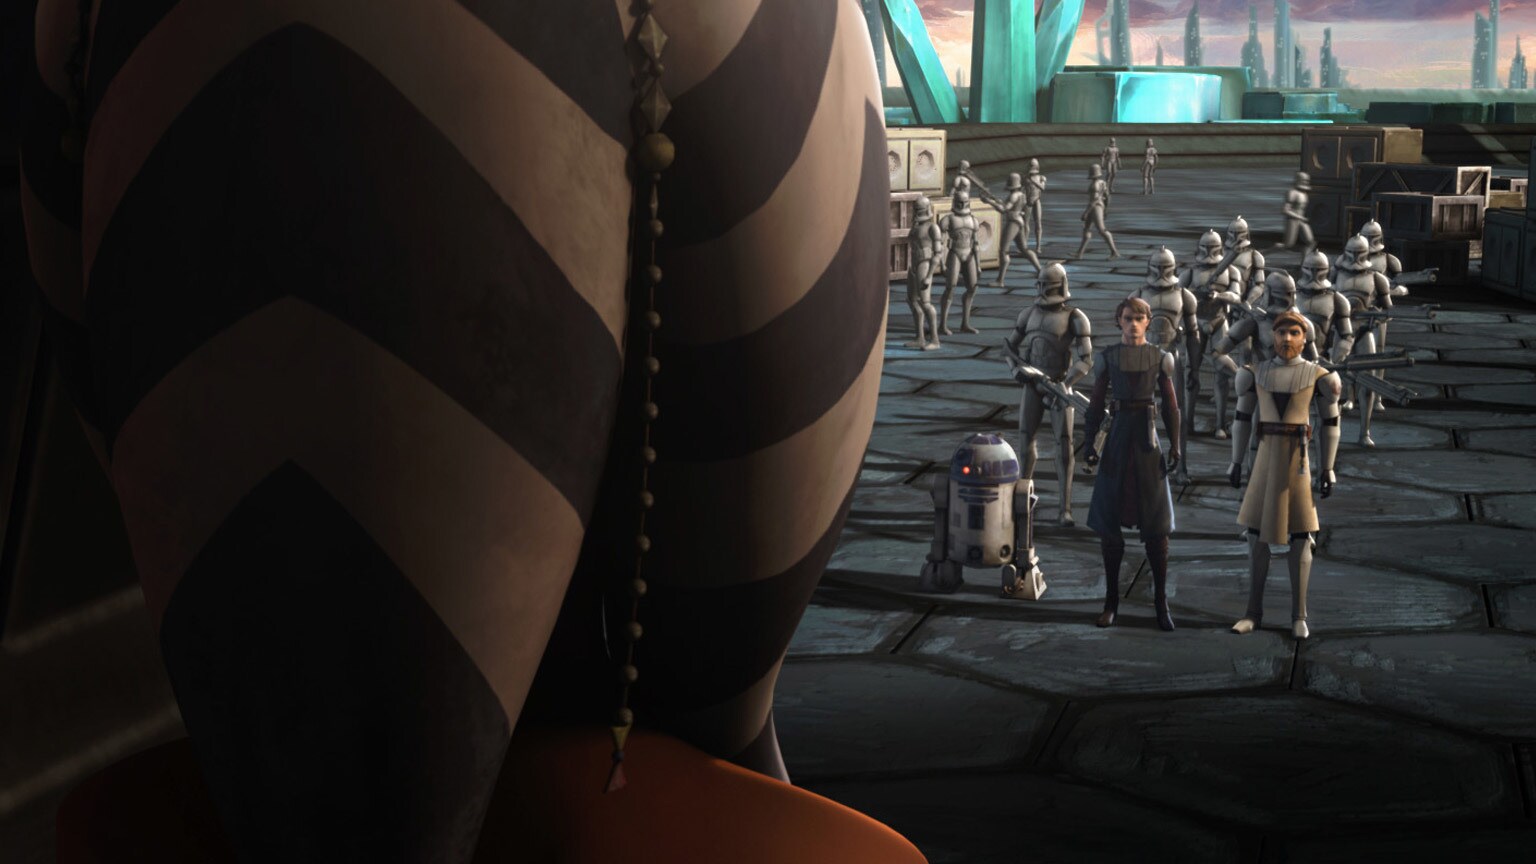 The Clone Wars Rewatch: Meet Ahsoka Tano in the Theatrical Release (Part 1 of 3)